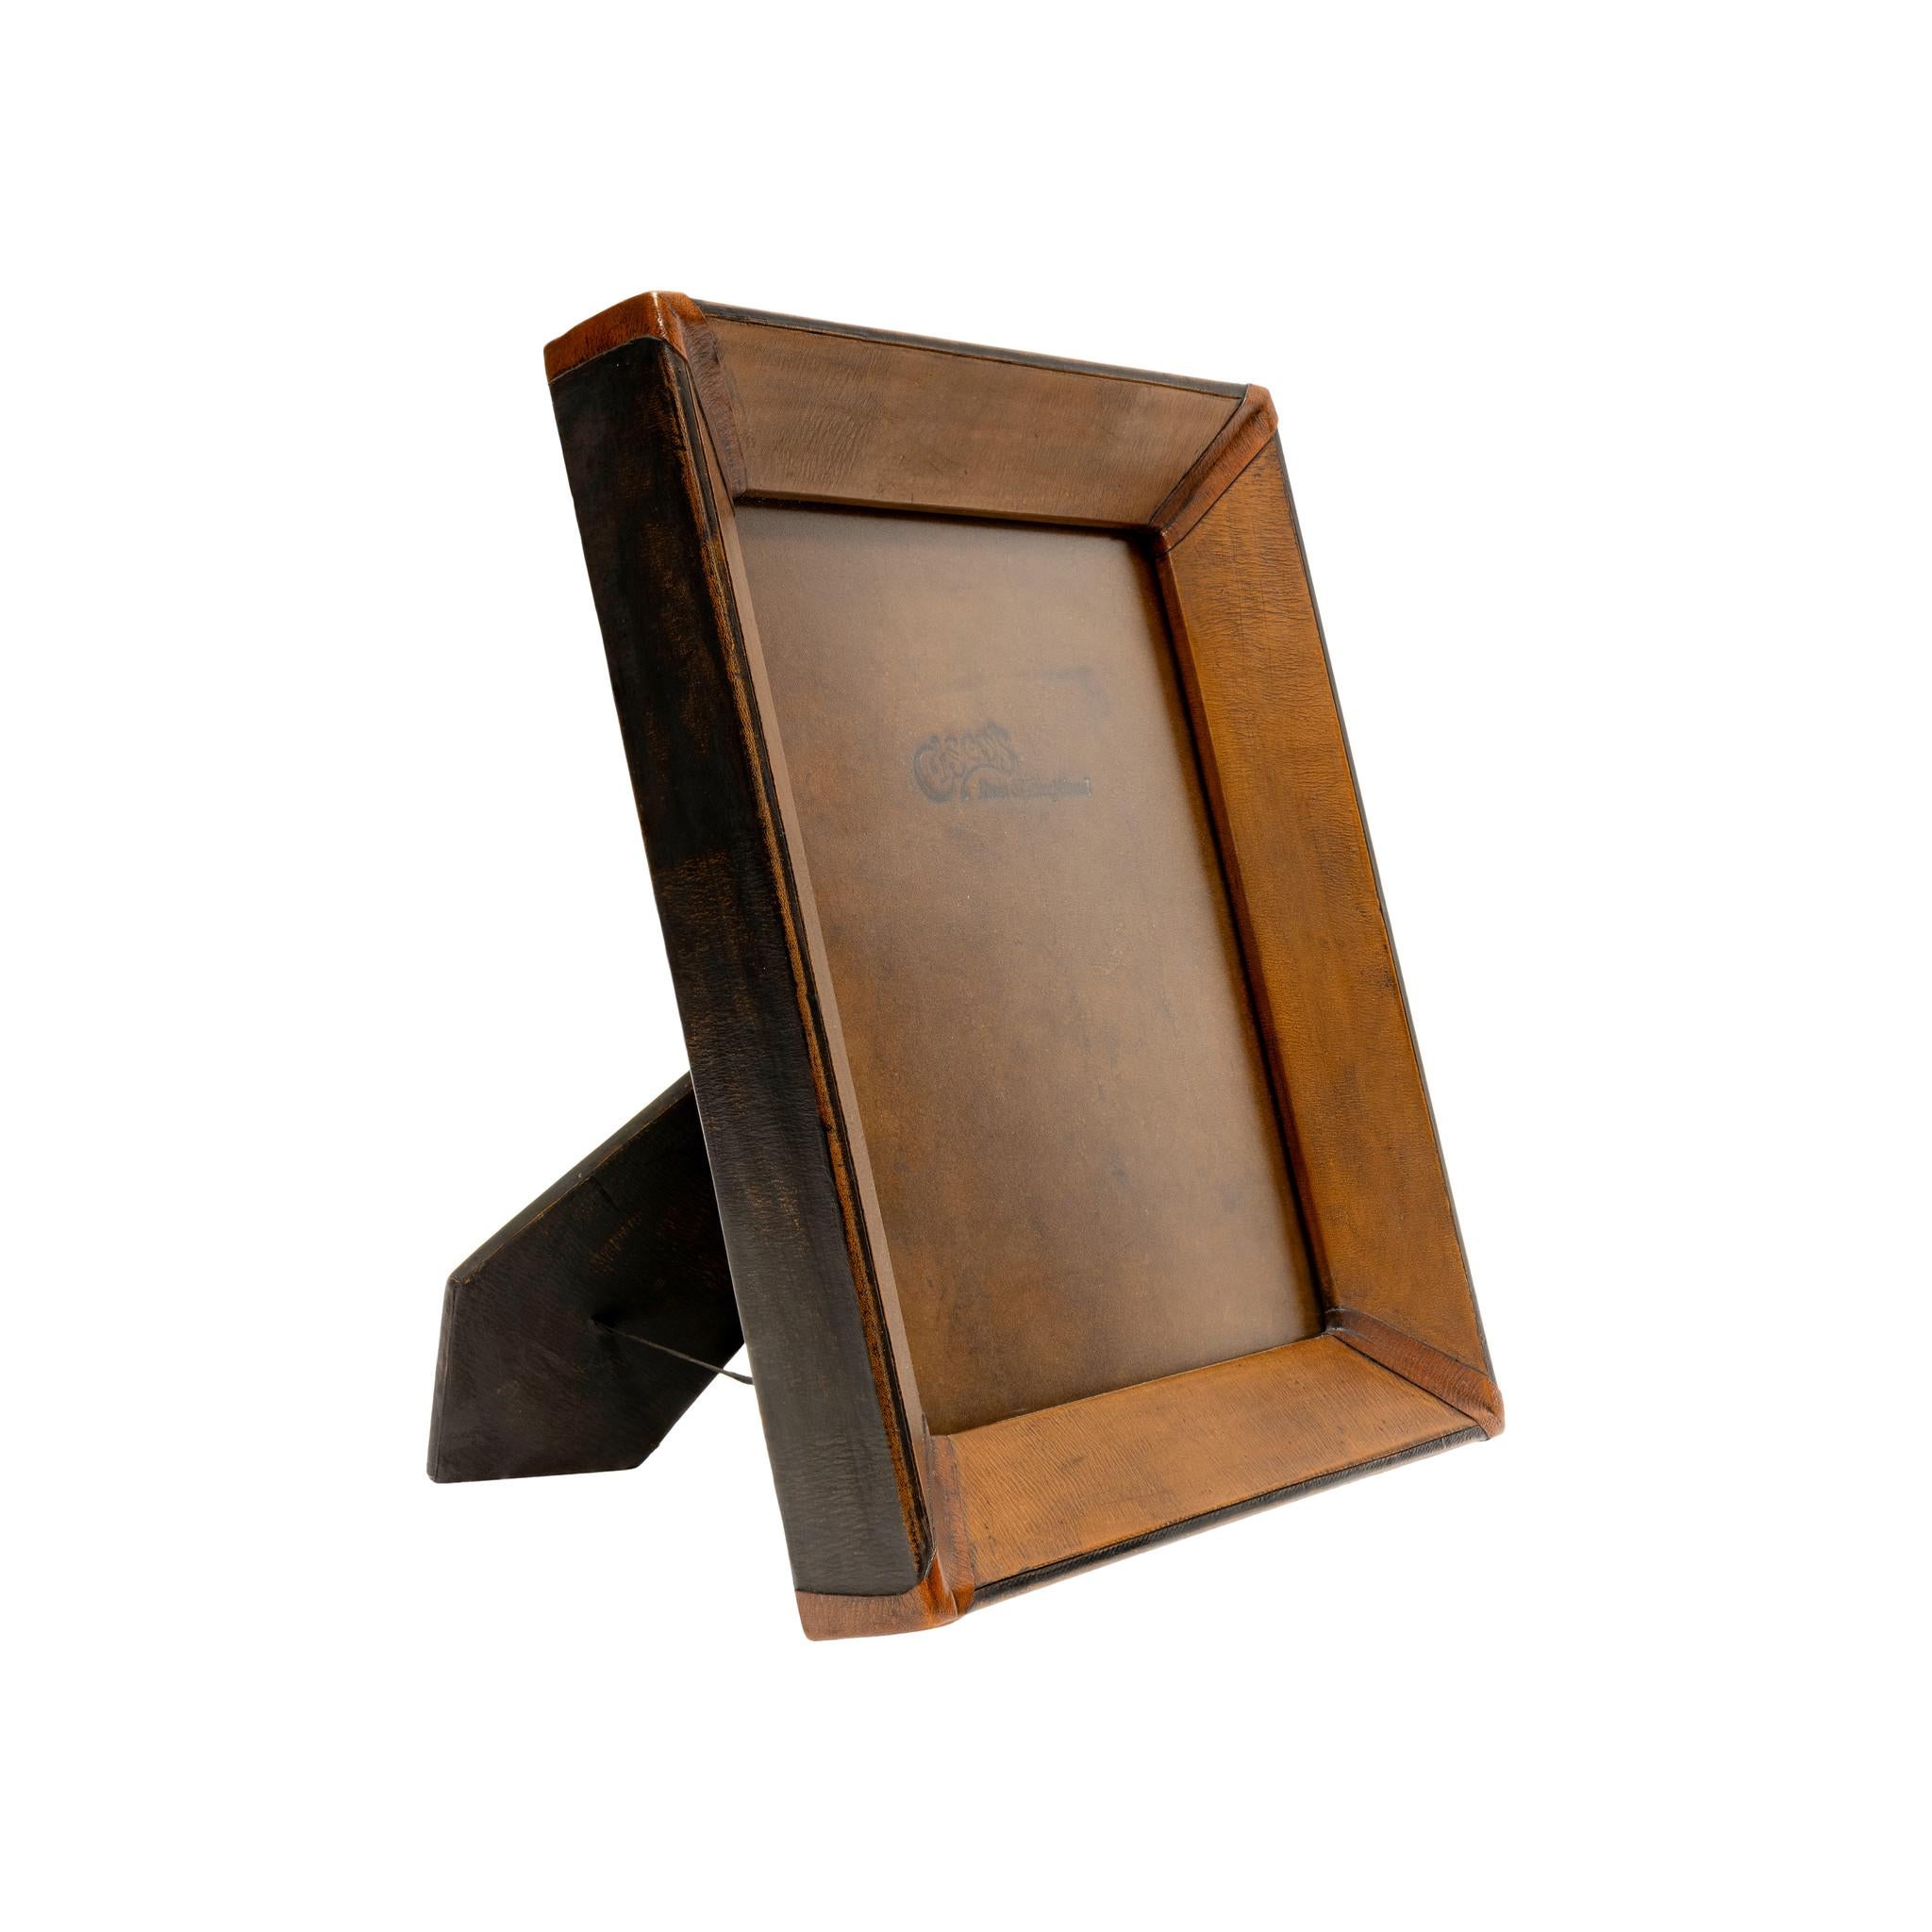 Contemporary 4x6 Medium Brown & Black Leather Tabletop Picture Frame- The Saddle Shop  For Sale